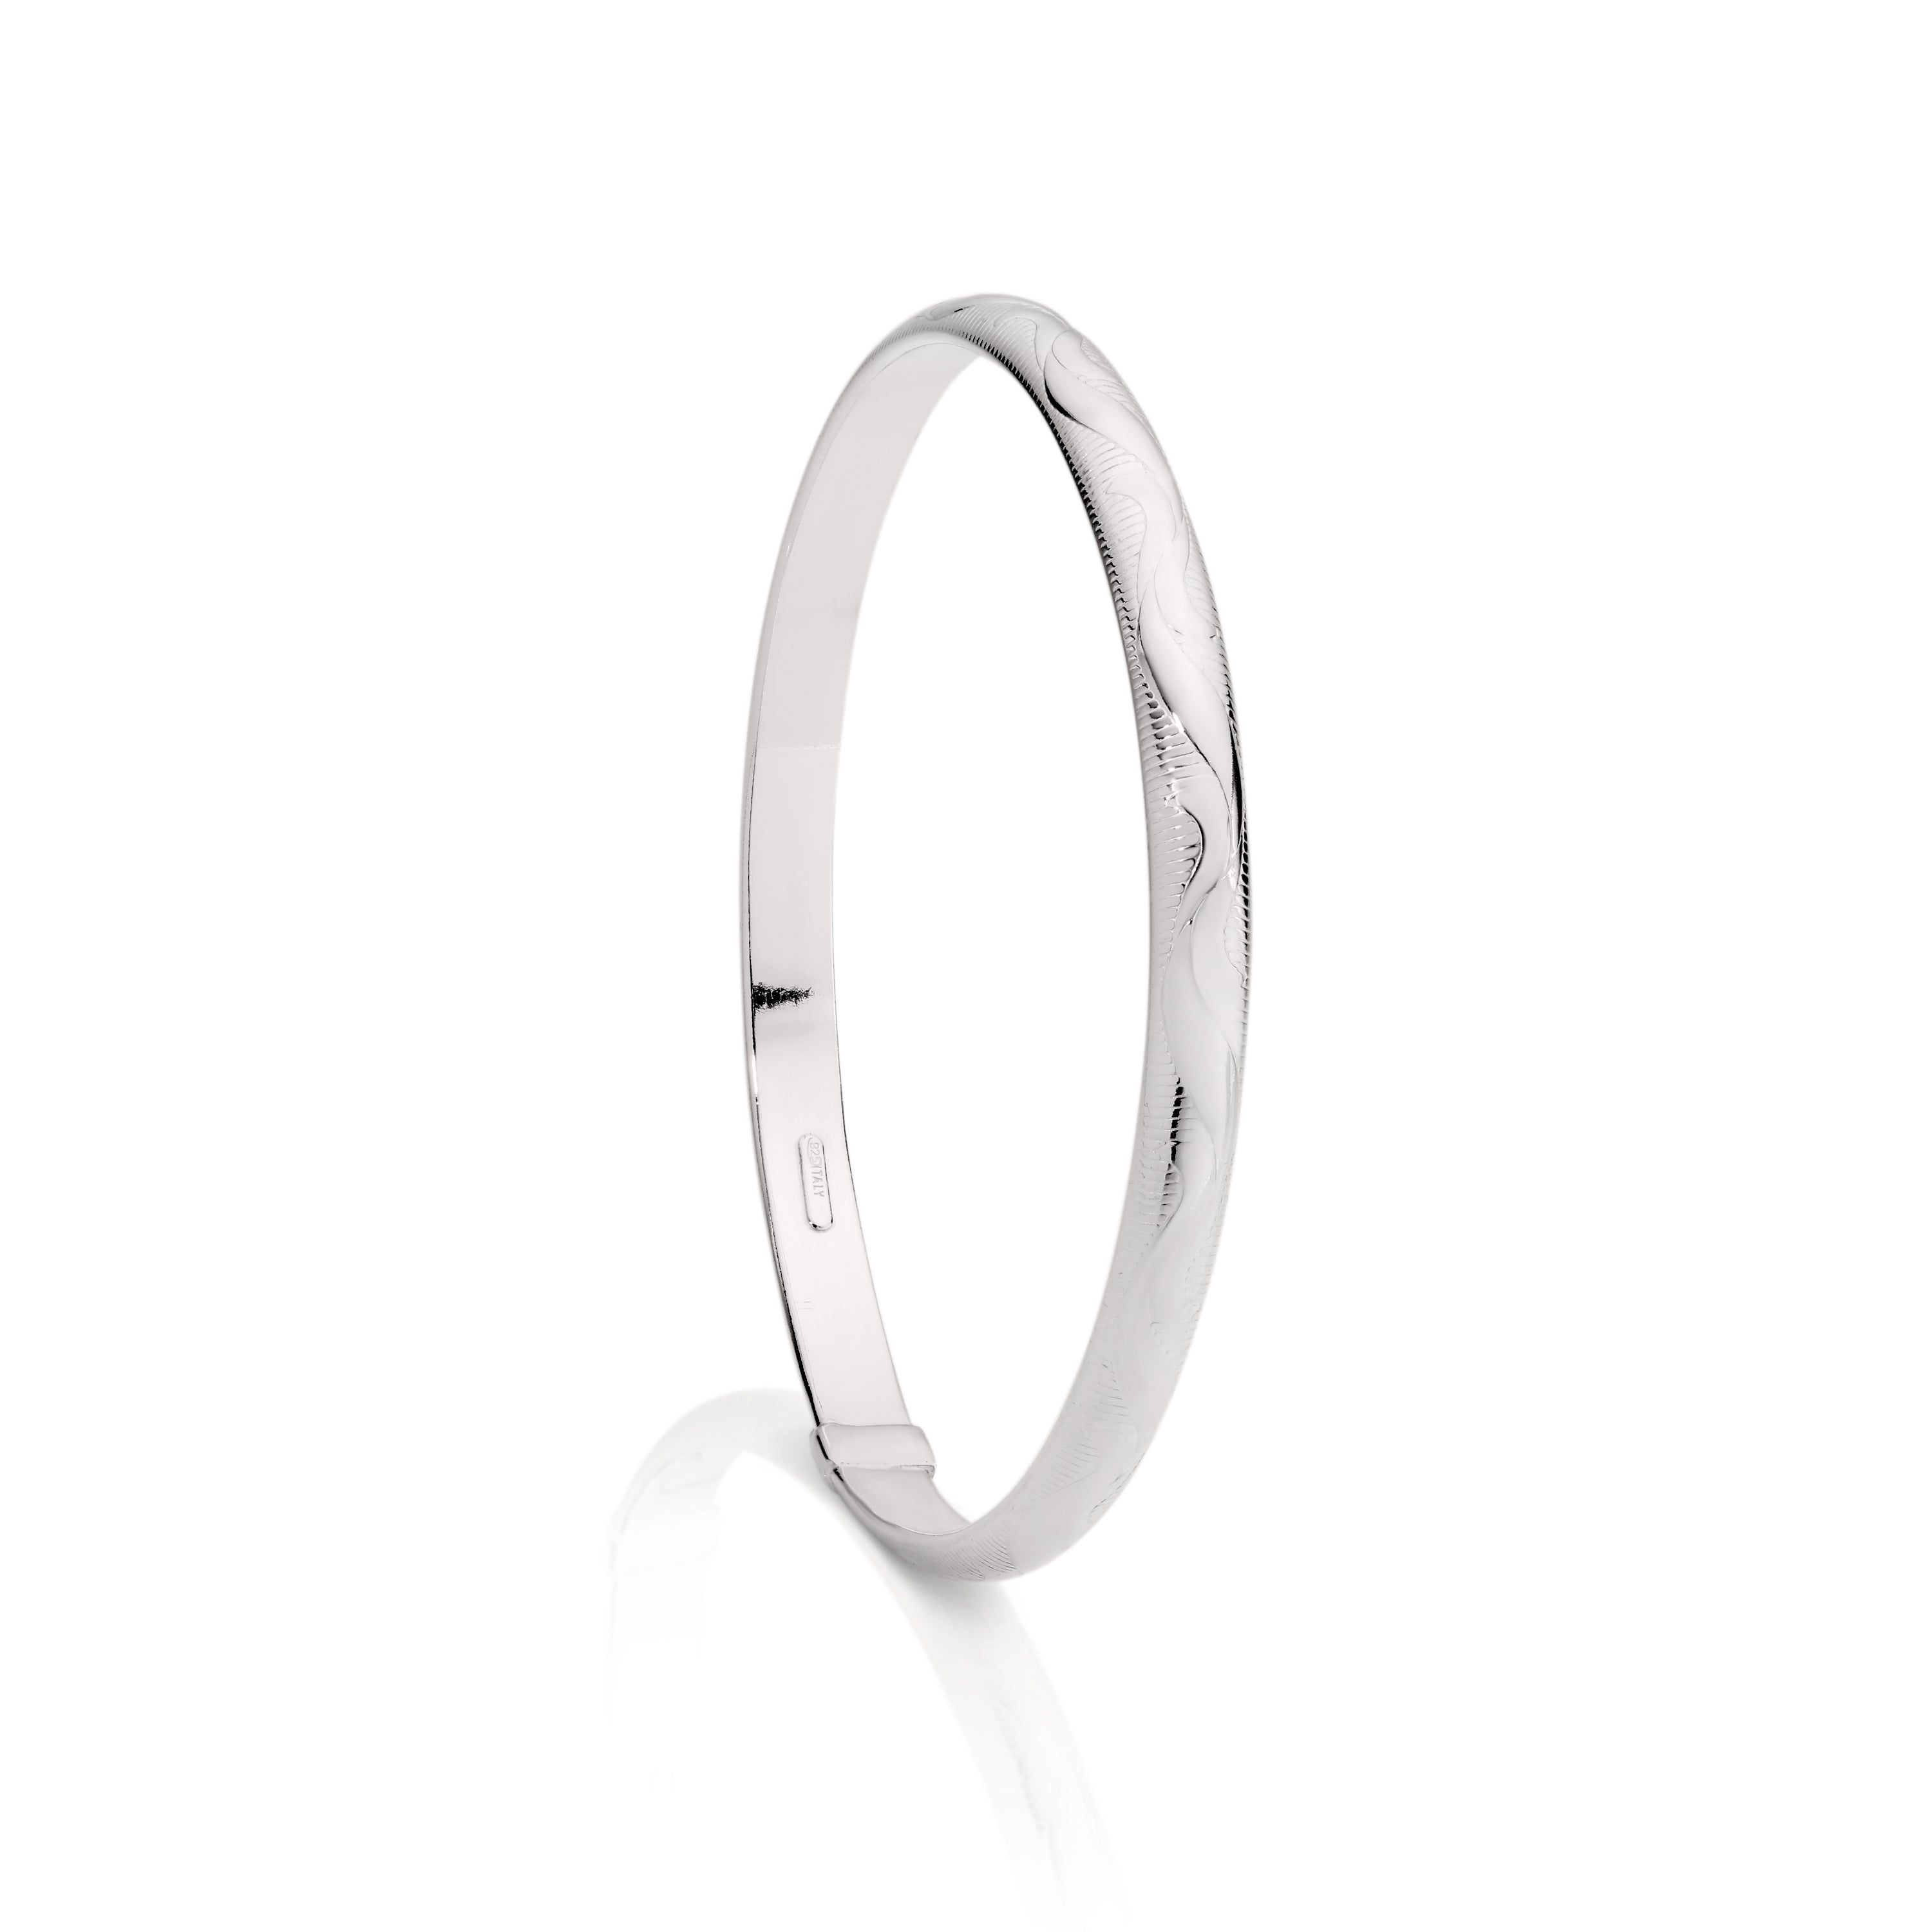 Silver 6mm engraved bangle 70mm